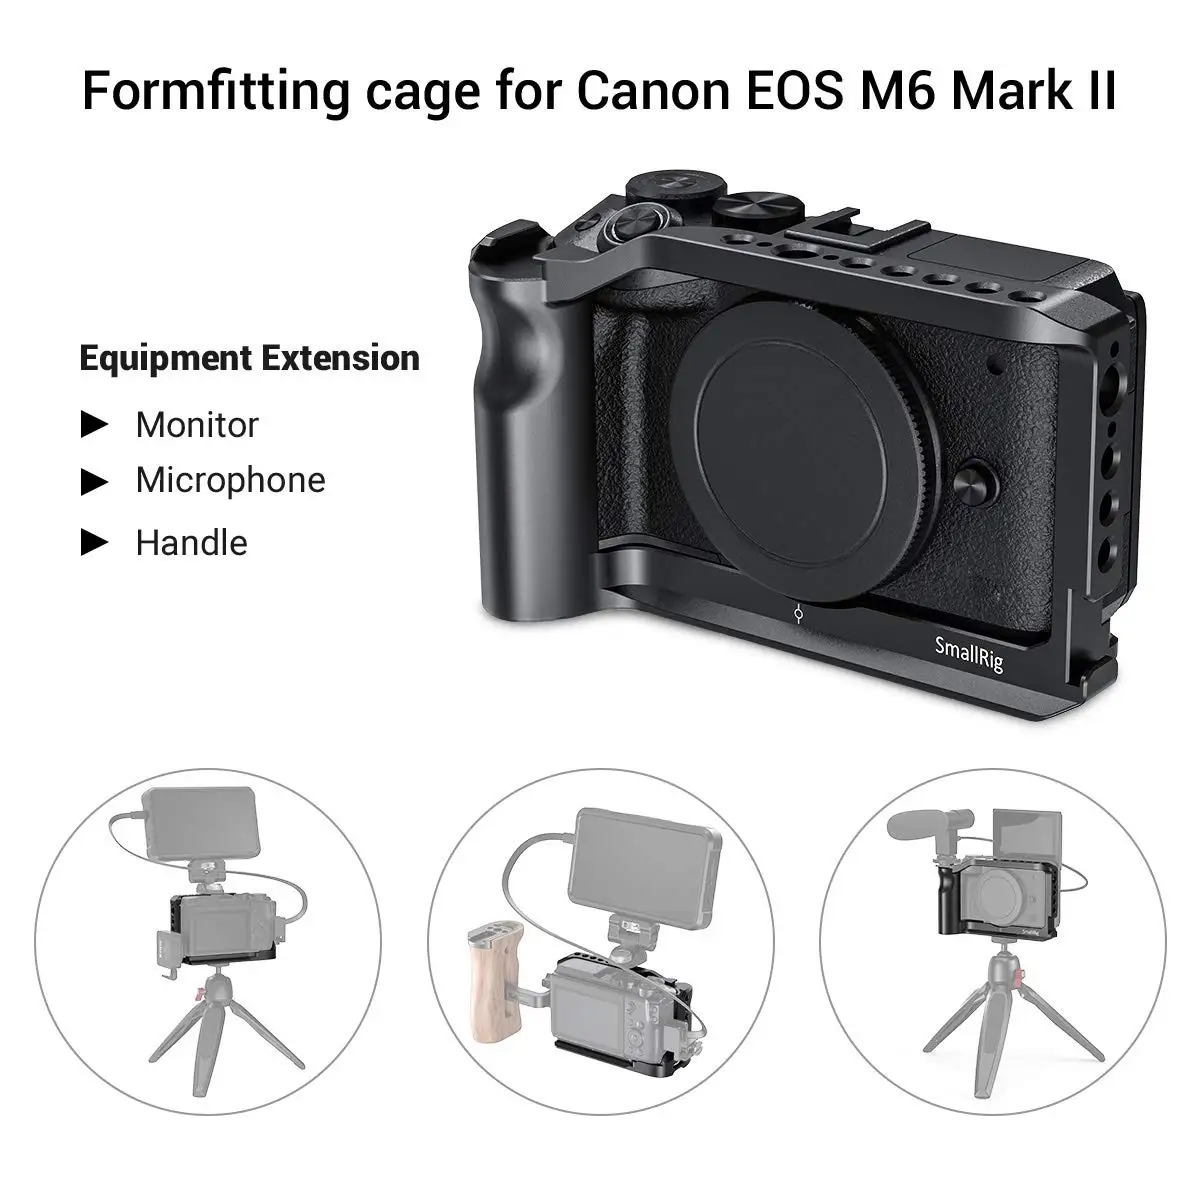 SmallRig Vlog Shooting Cage for Canon EOS M6 Mark II Camera Cage With Cold Shoe Mount/Integrated Handgrip/ARRI Threadings -2515B enlarge